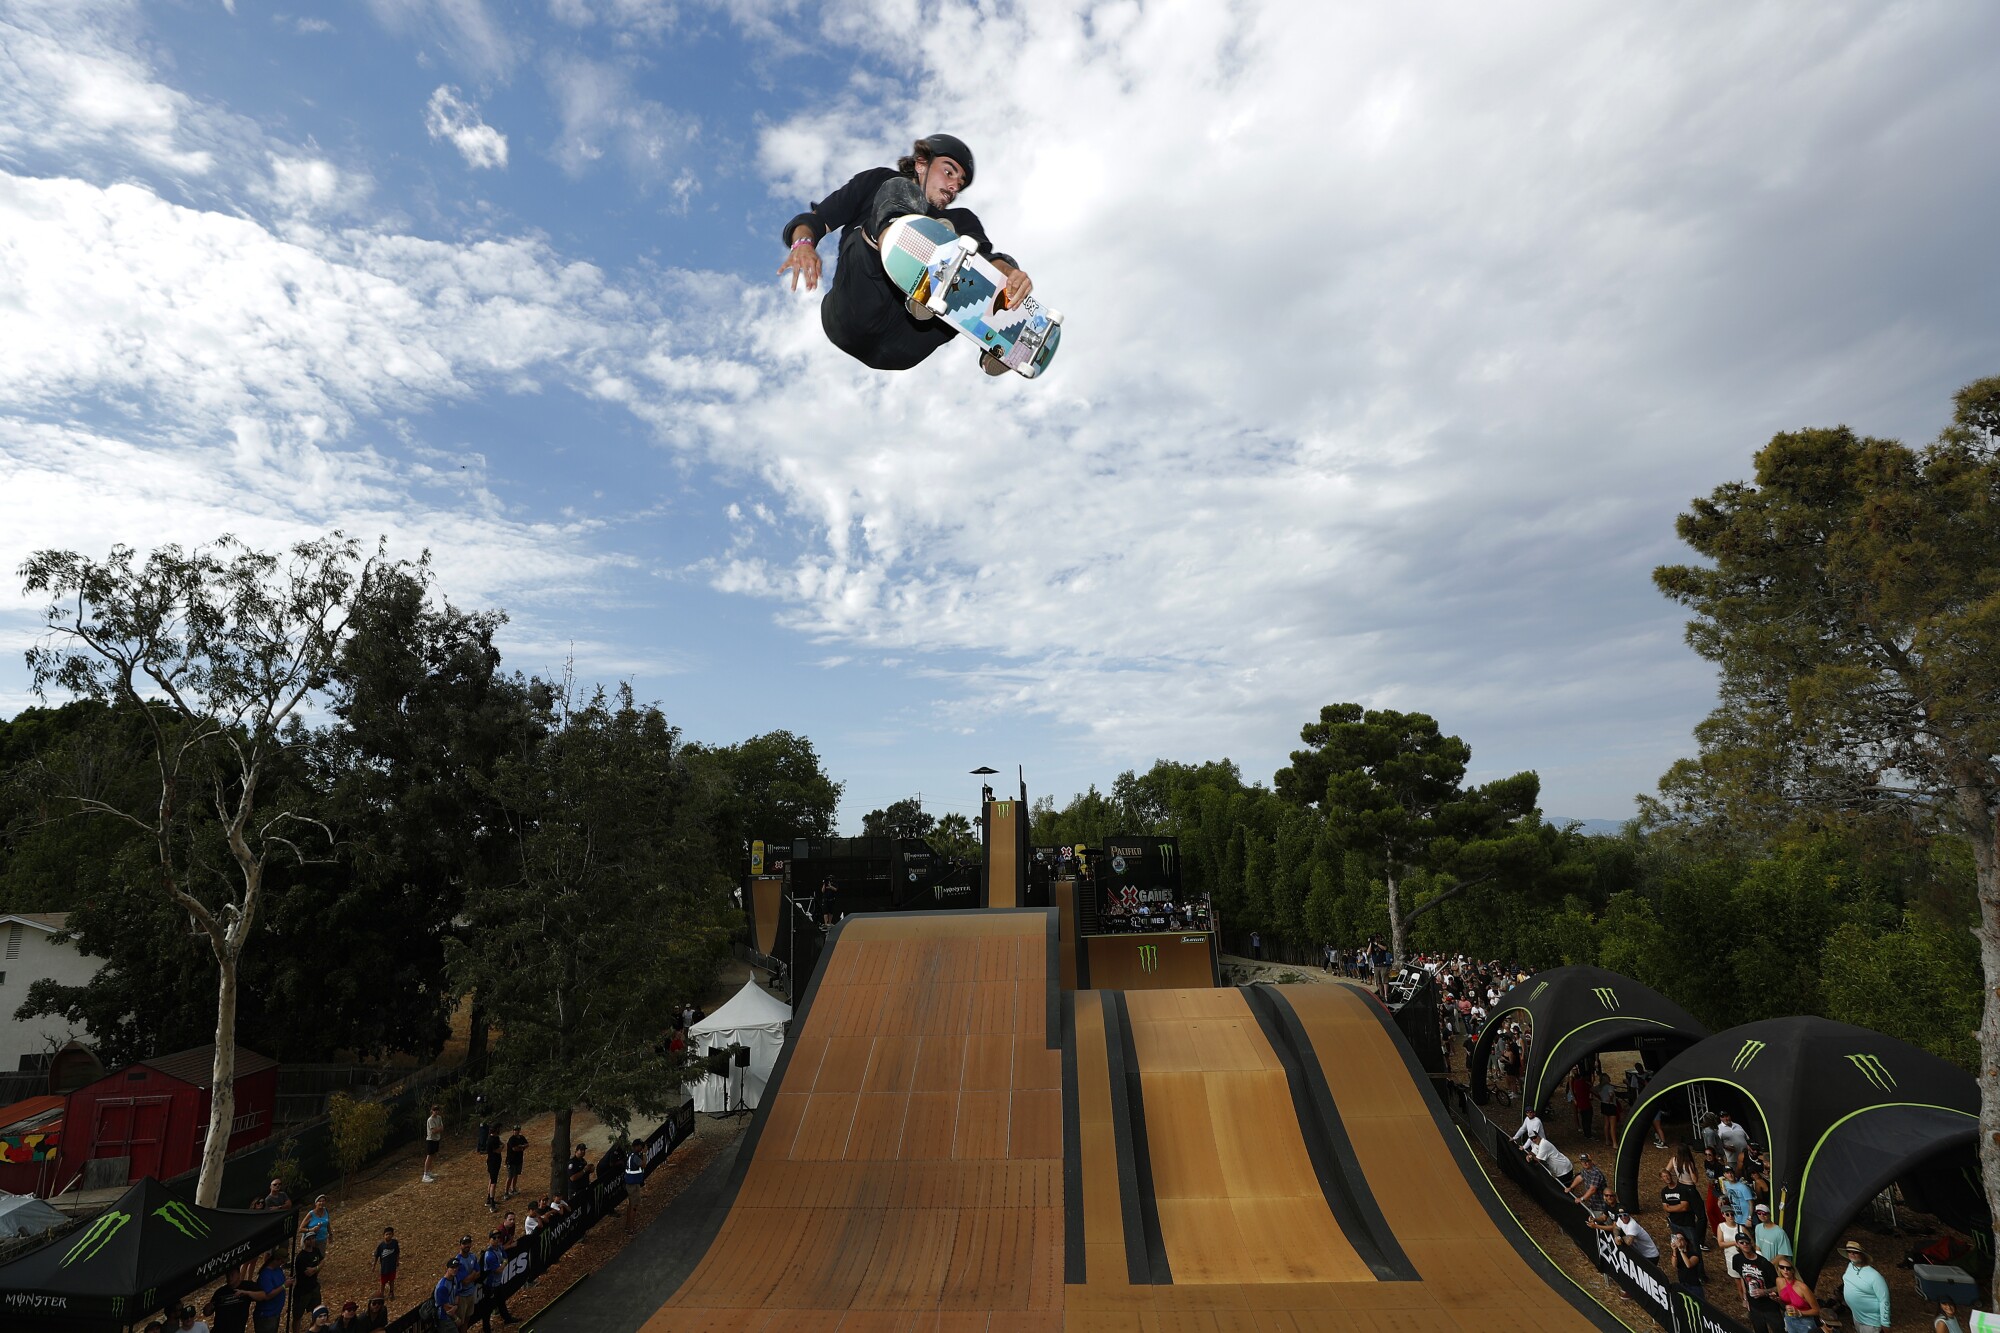 Edouard Damestoy of France won the Skateboard MegaPark competition in the X Games in Vista on Wednesday.